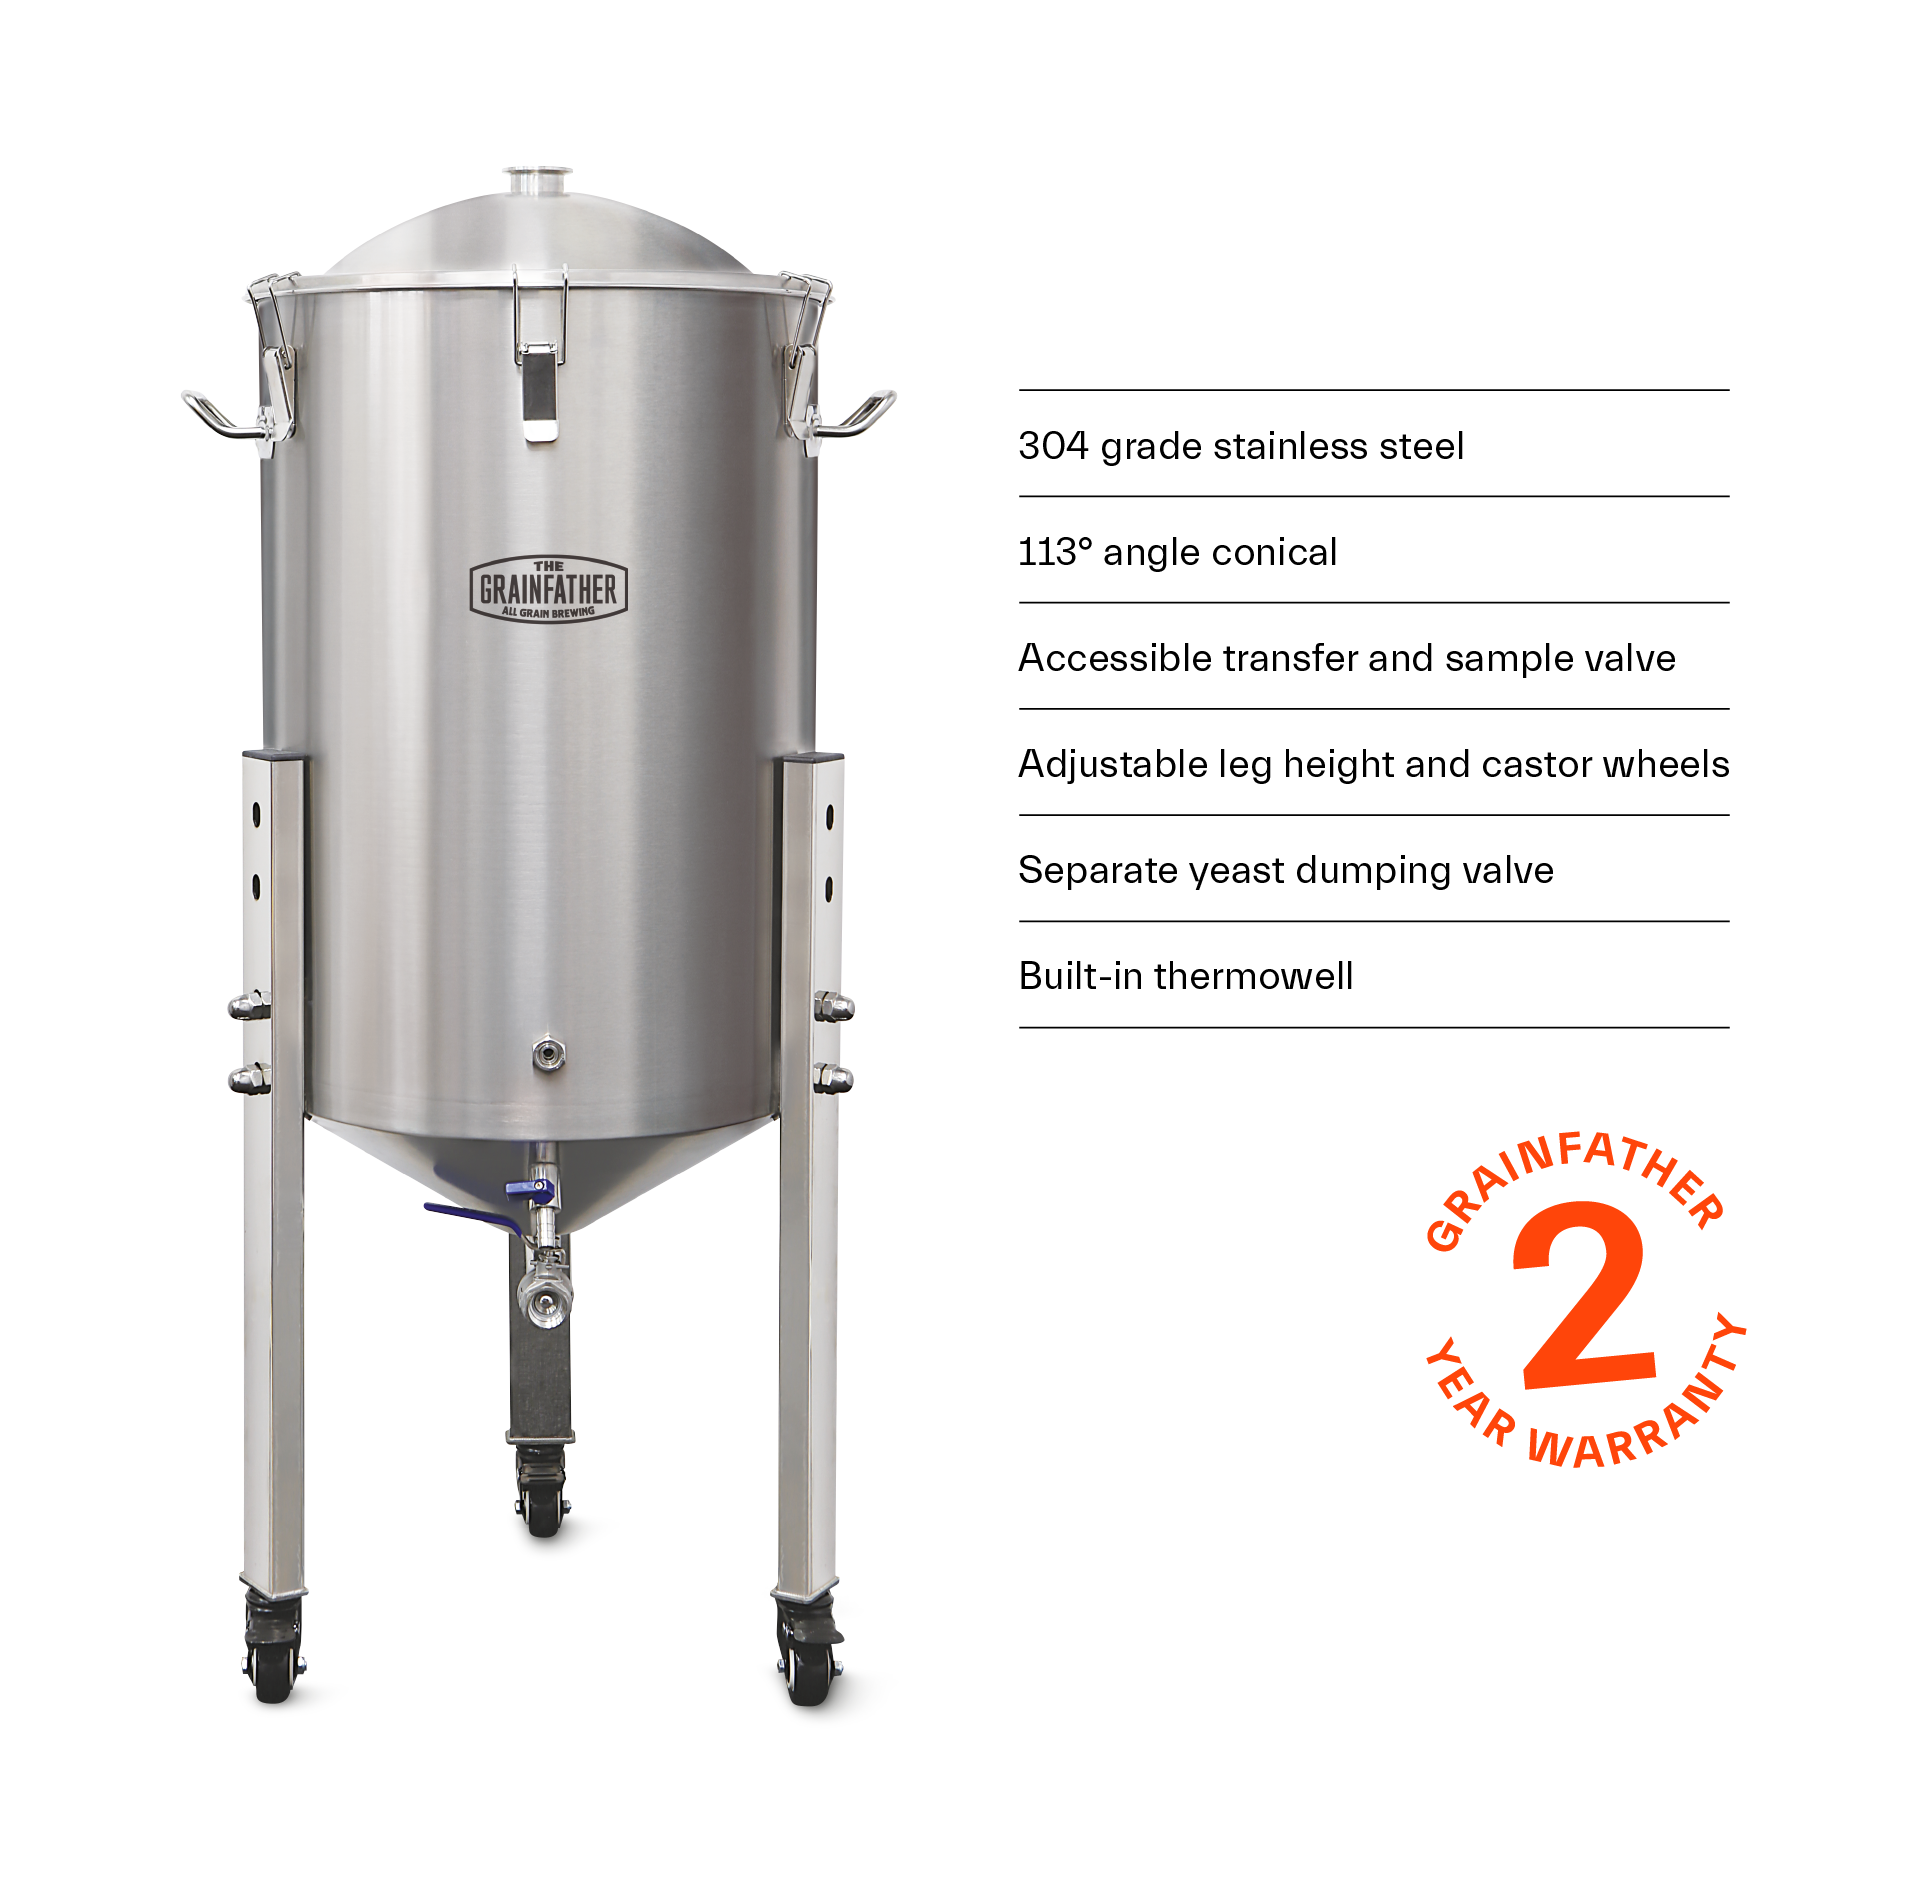 Grainfather SF70 Features